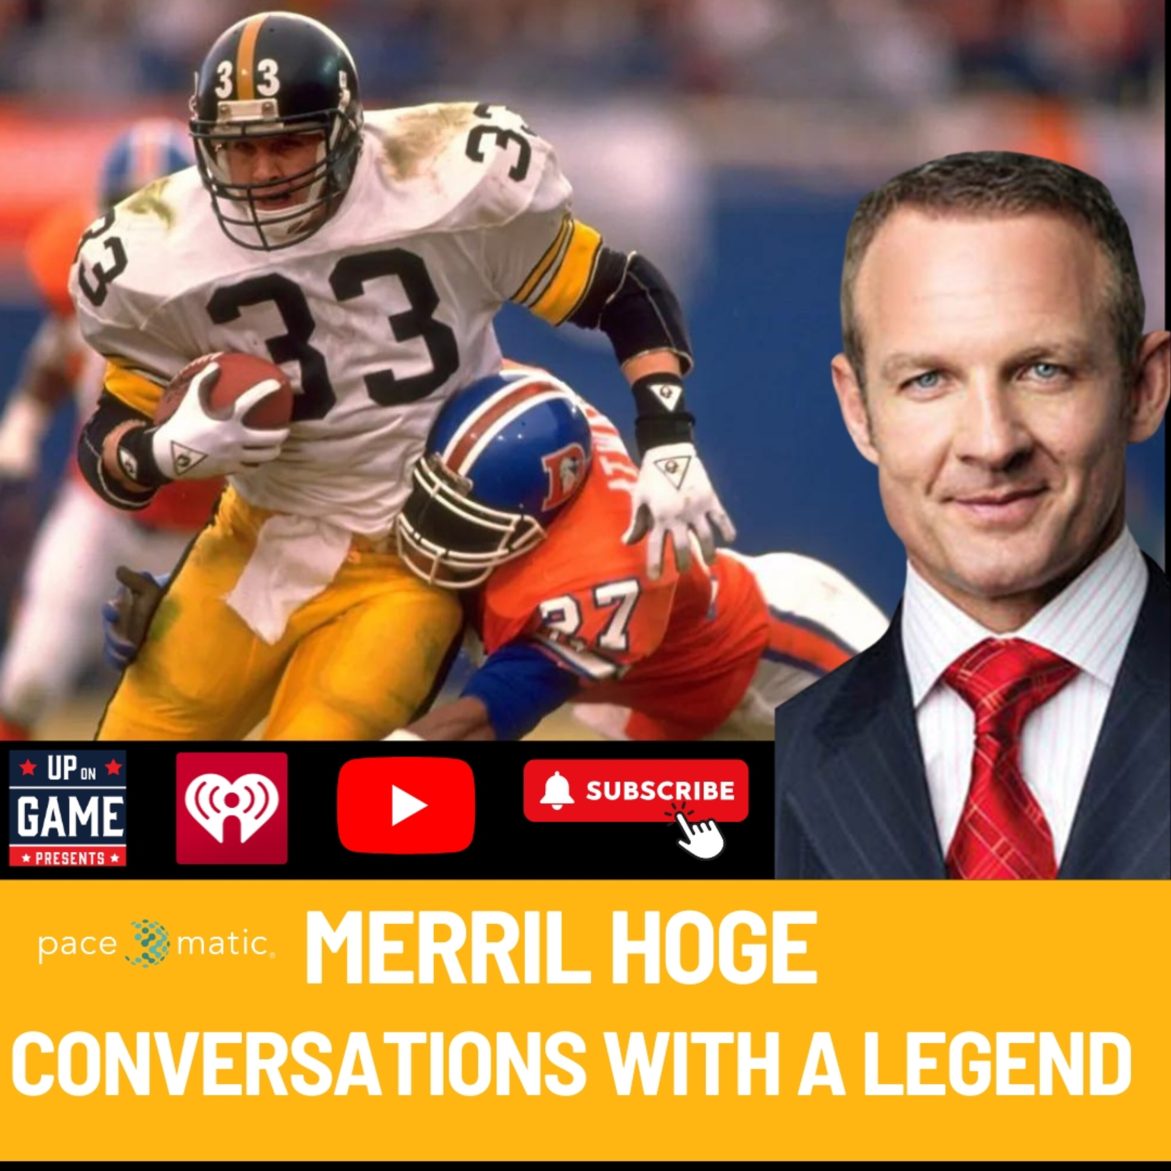 Black Podcasting - Up On Game Presents Conversations With A Legend Merril Hoge "Roethlisberger Held People Accountable"